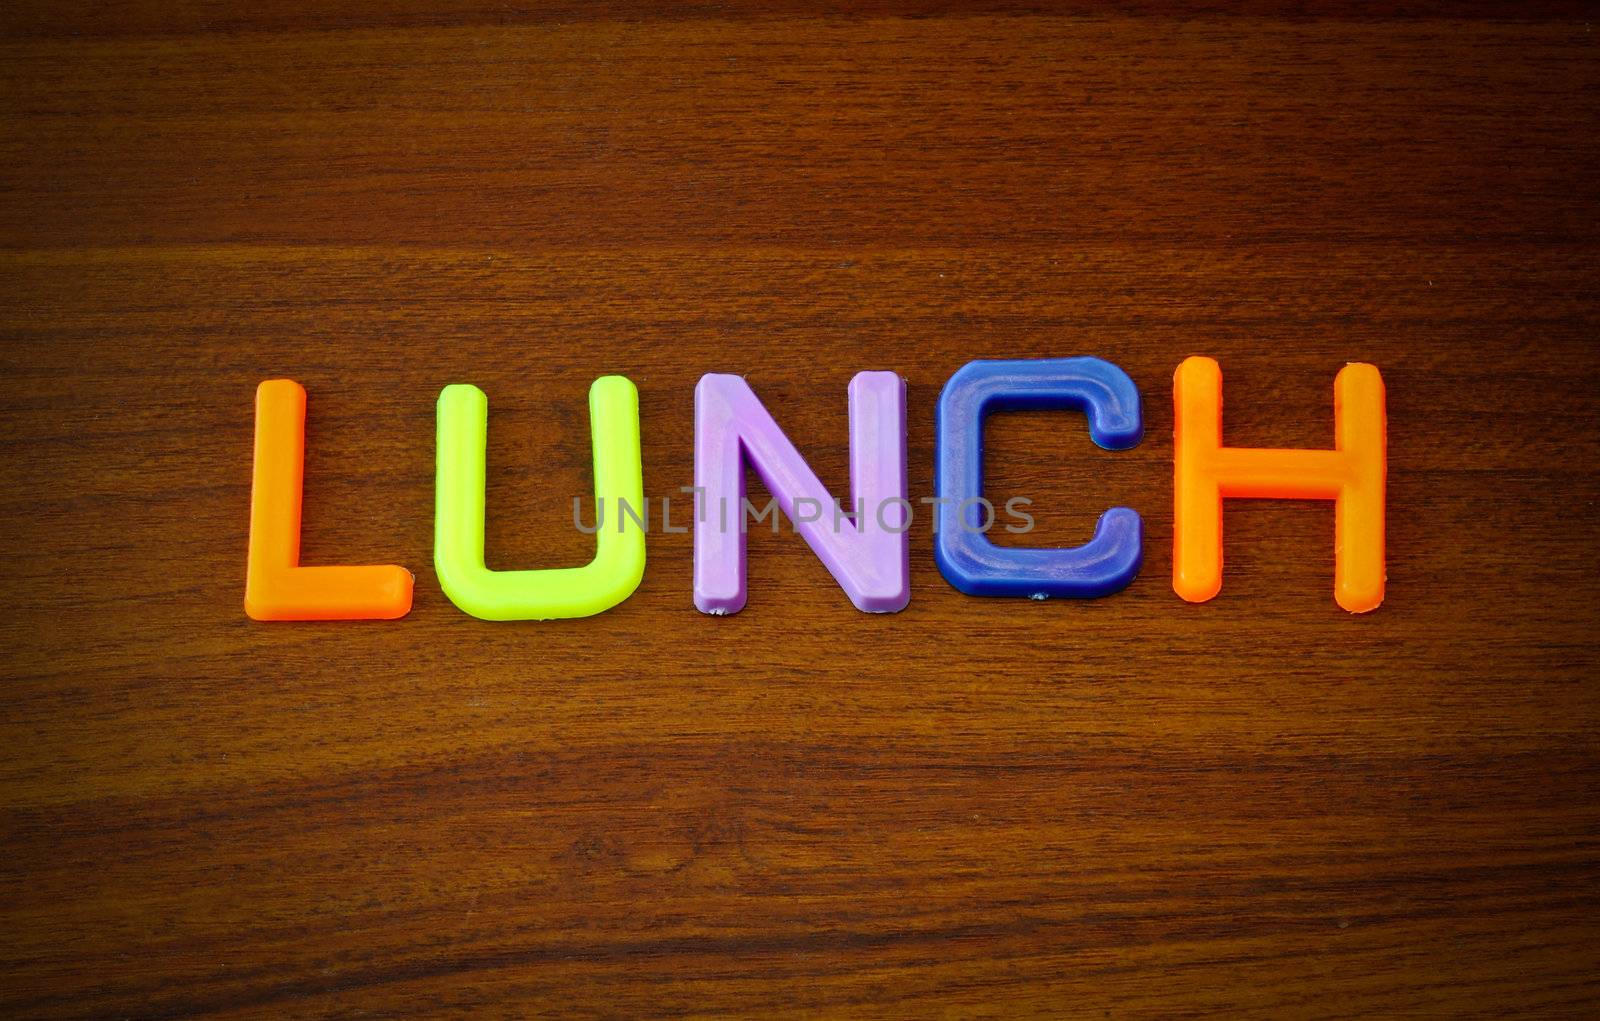 Lunch in colorful toy letters on wood background by nuchylee